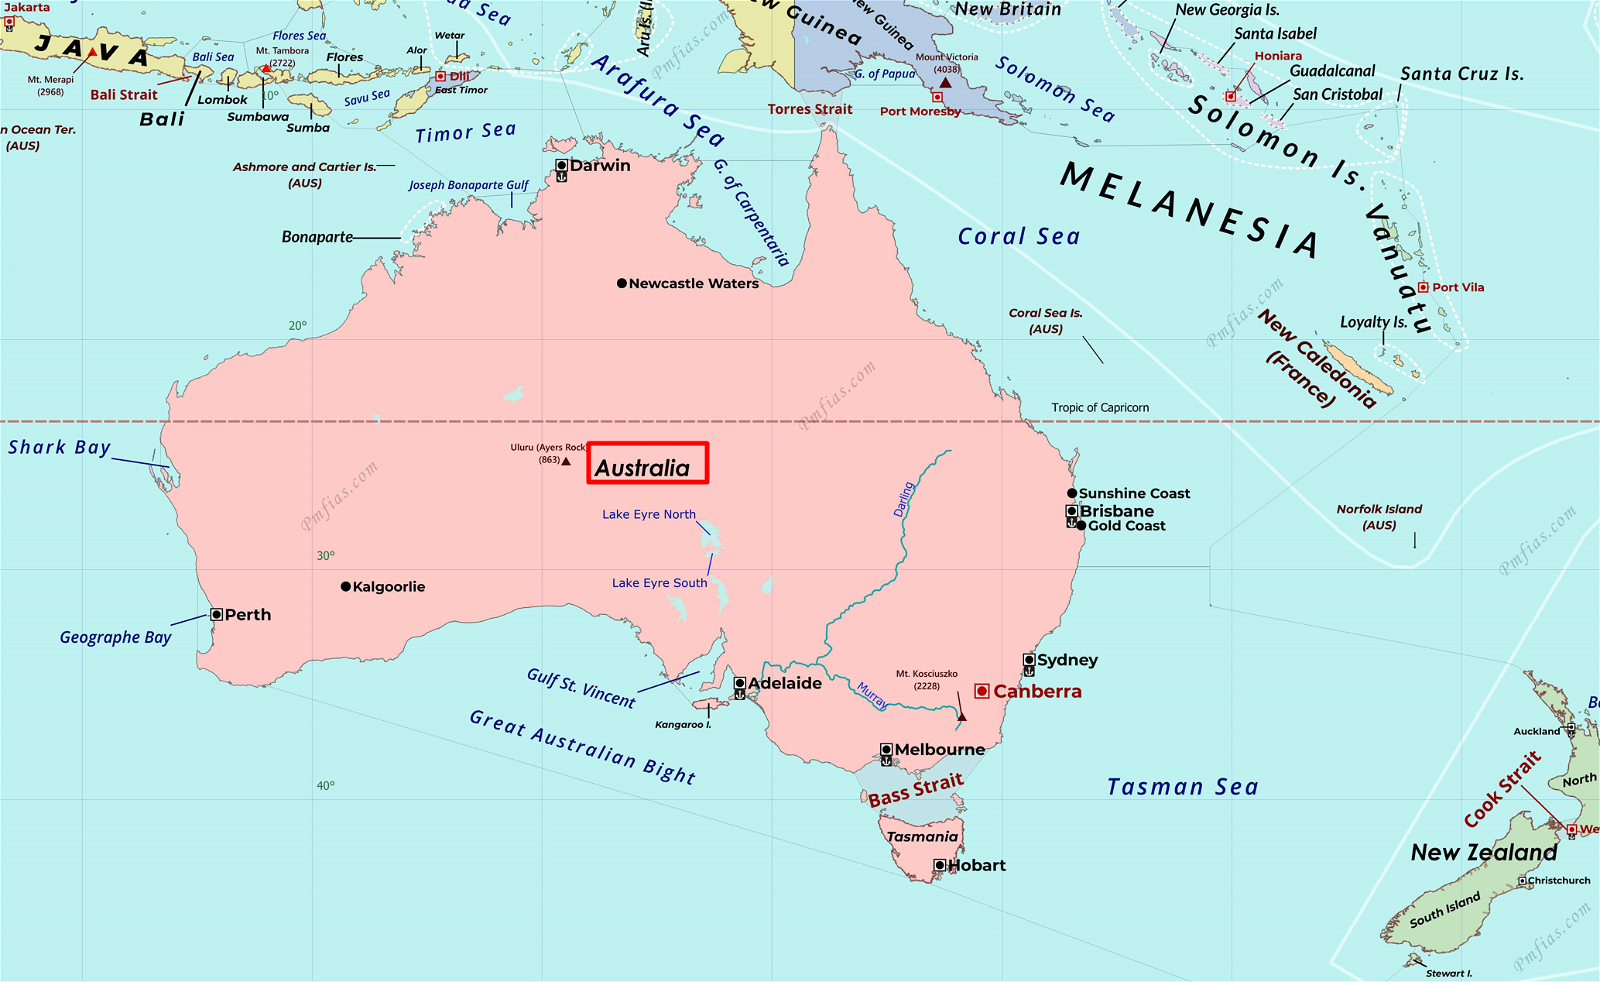 A map of australia with black text
Description automatically generated